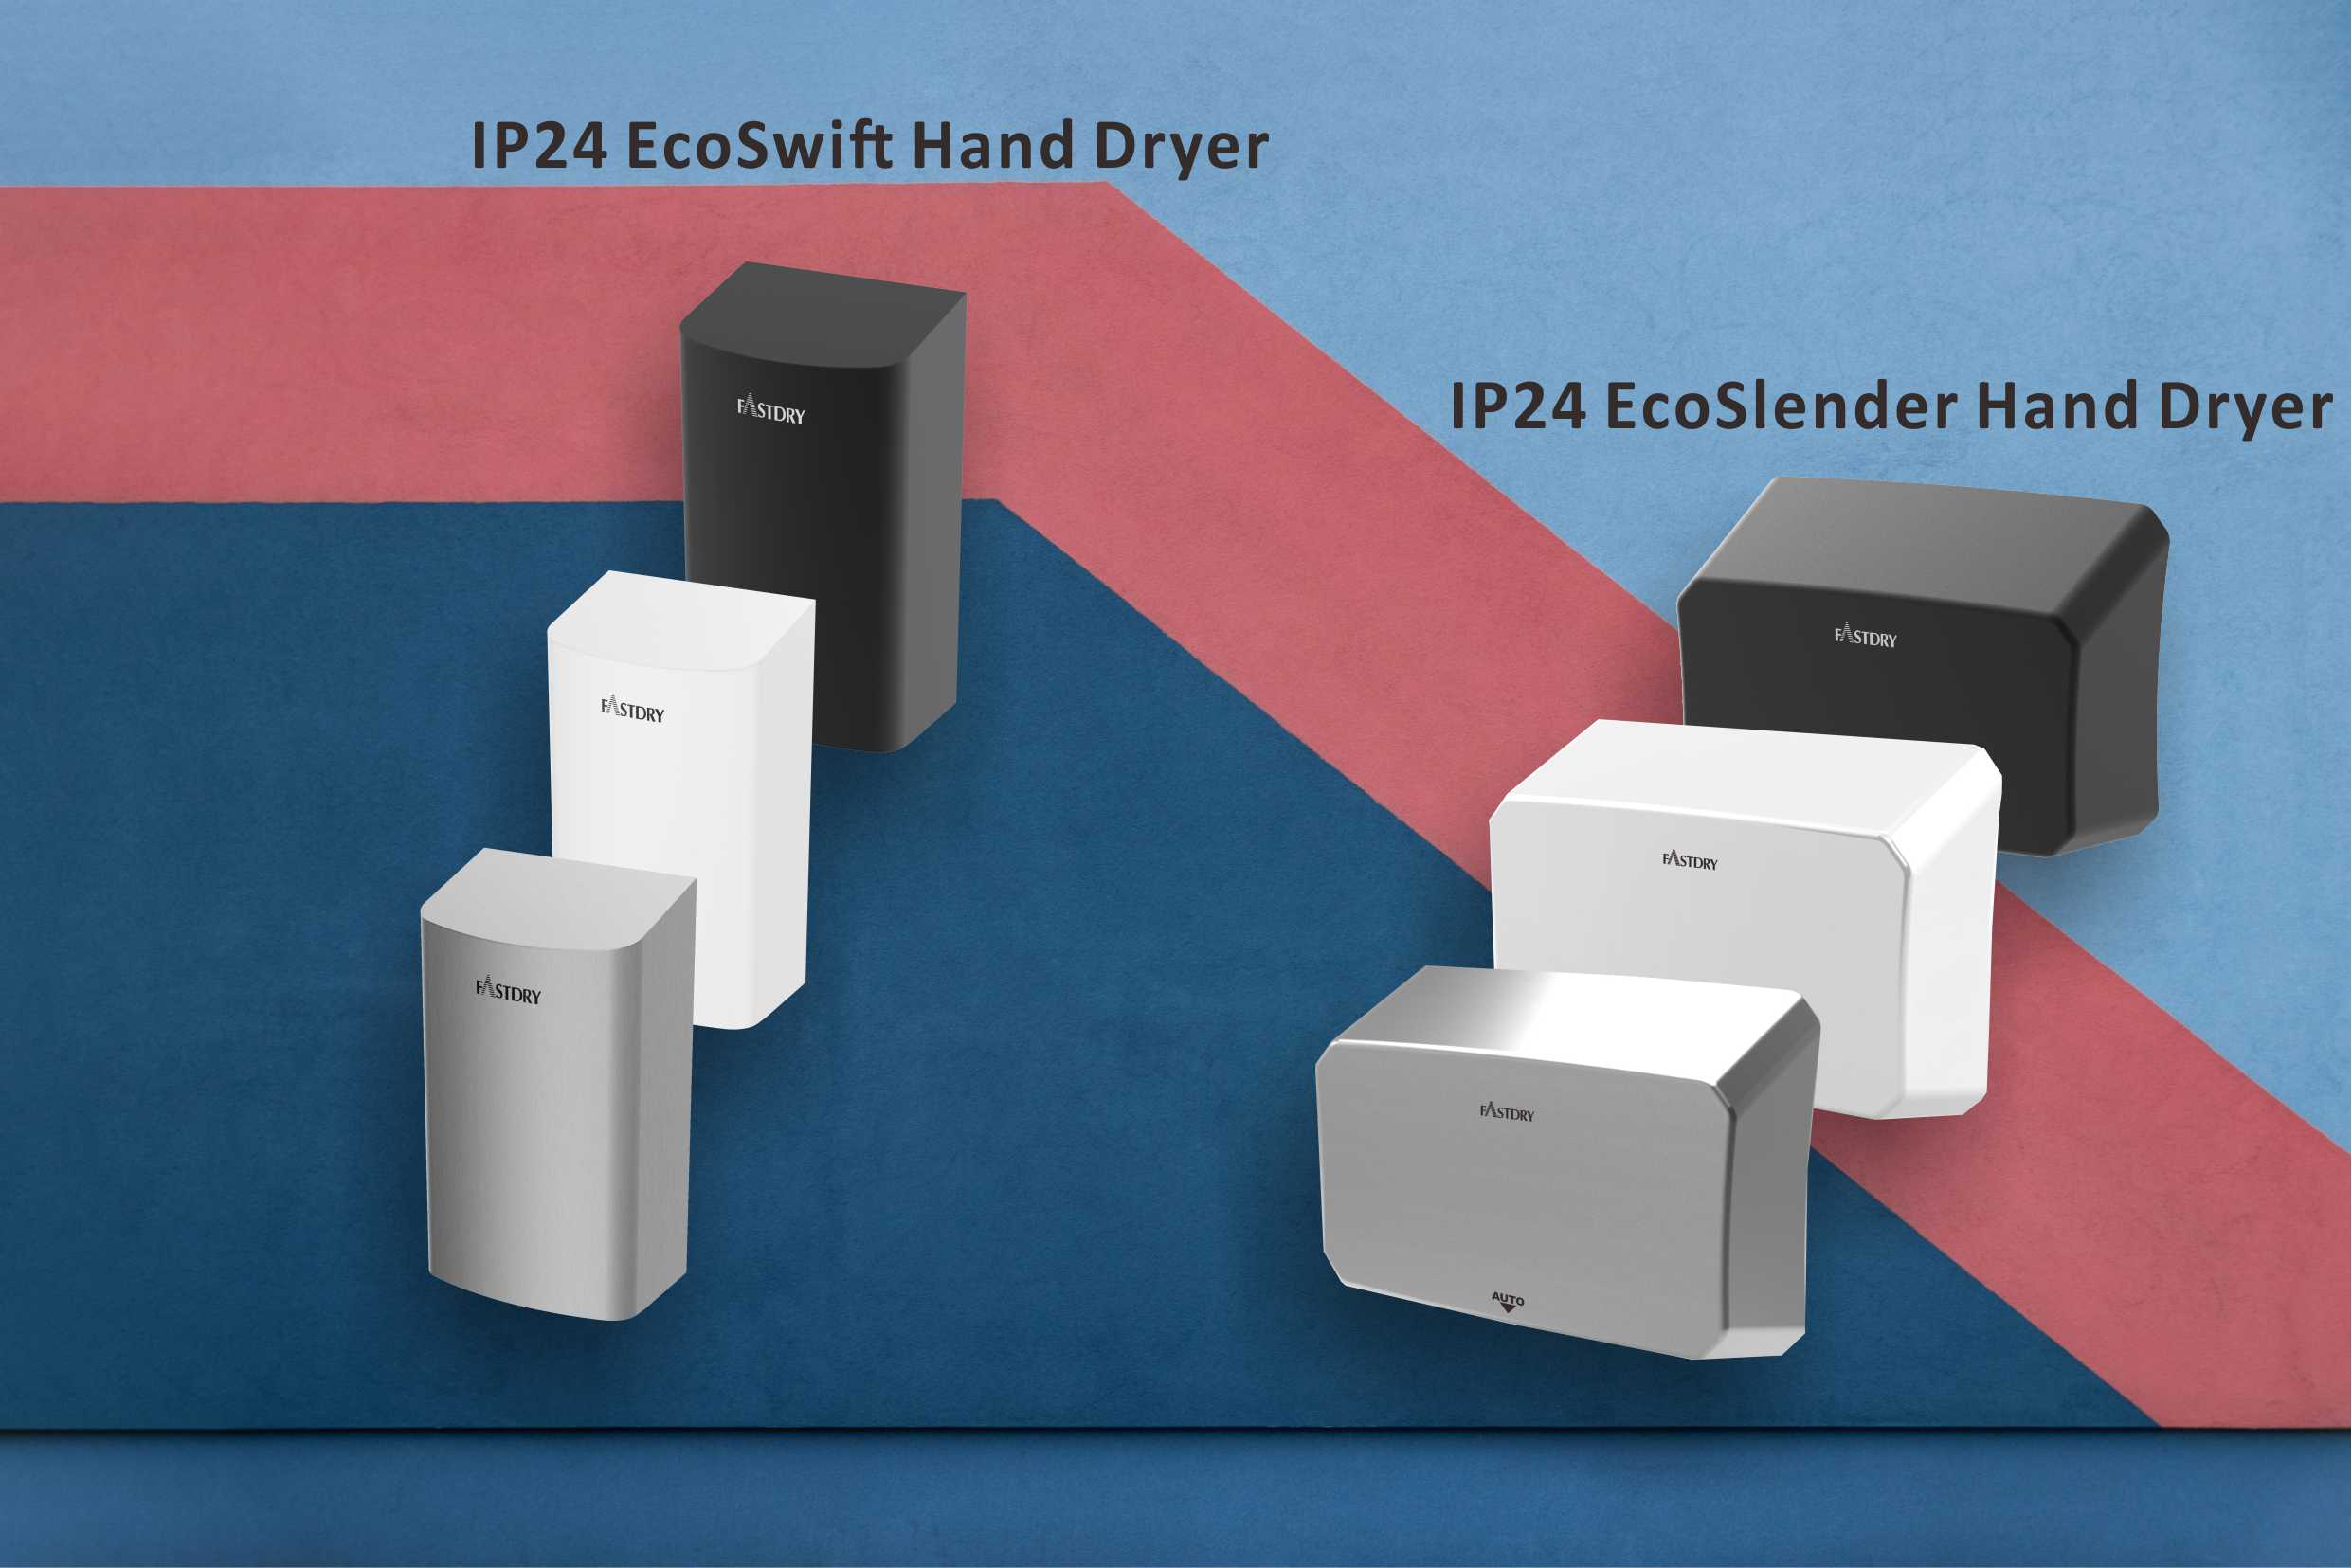 IP24 EcoSwift and EcoHygiene Hand Dryer